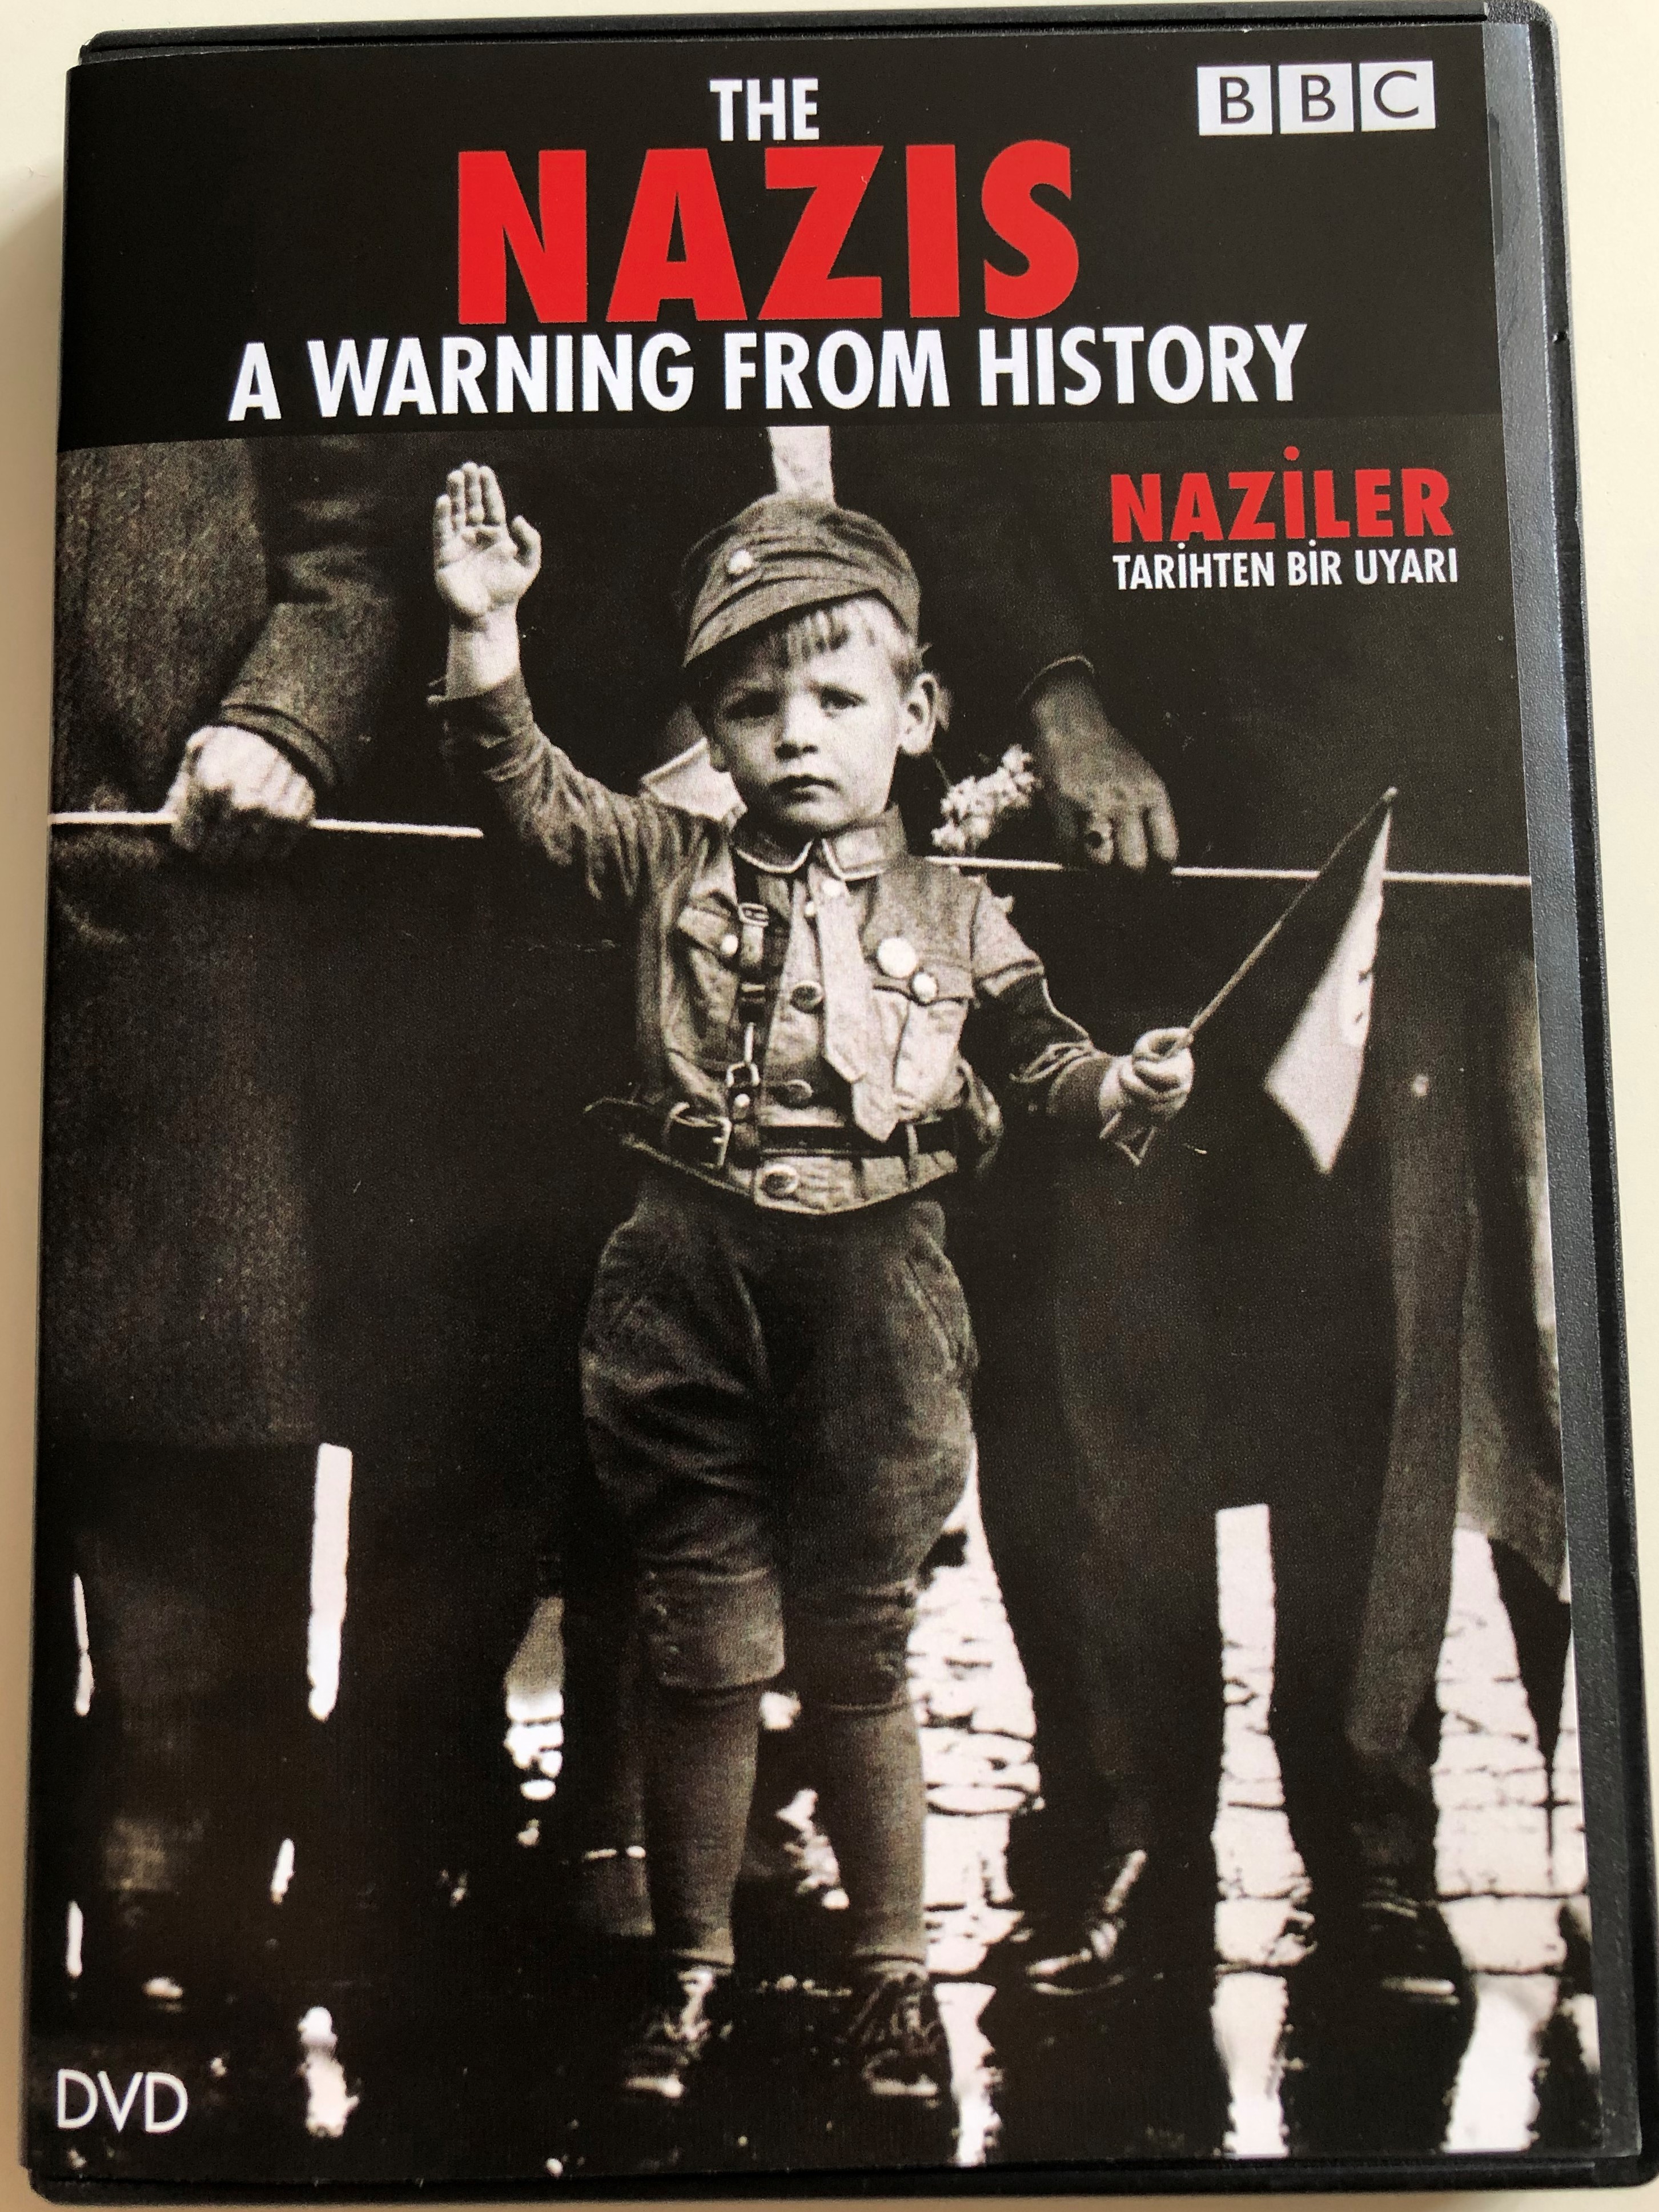 the-nazis-a-warning-from-history-dvd-1996-naziler-tarihten-bir-uyari-bbc-documentary-narrated-by-samuel-west-scenario-and-production-by-laurence-rees-1-.jpg